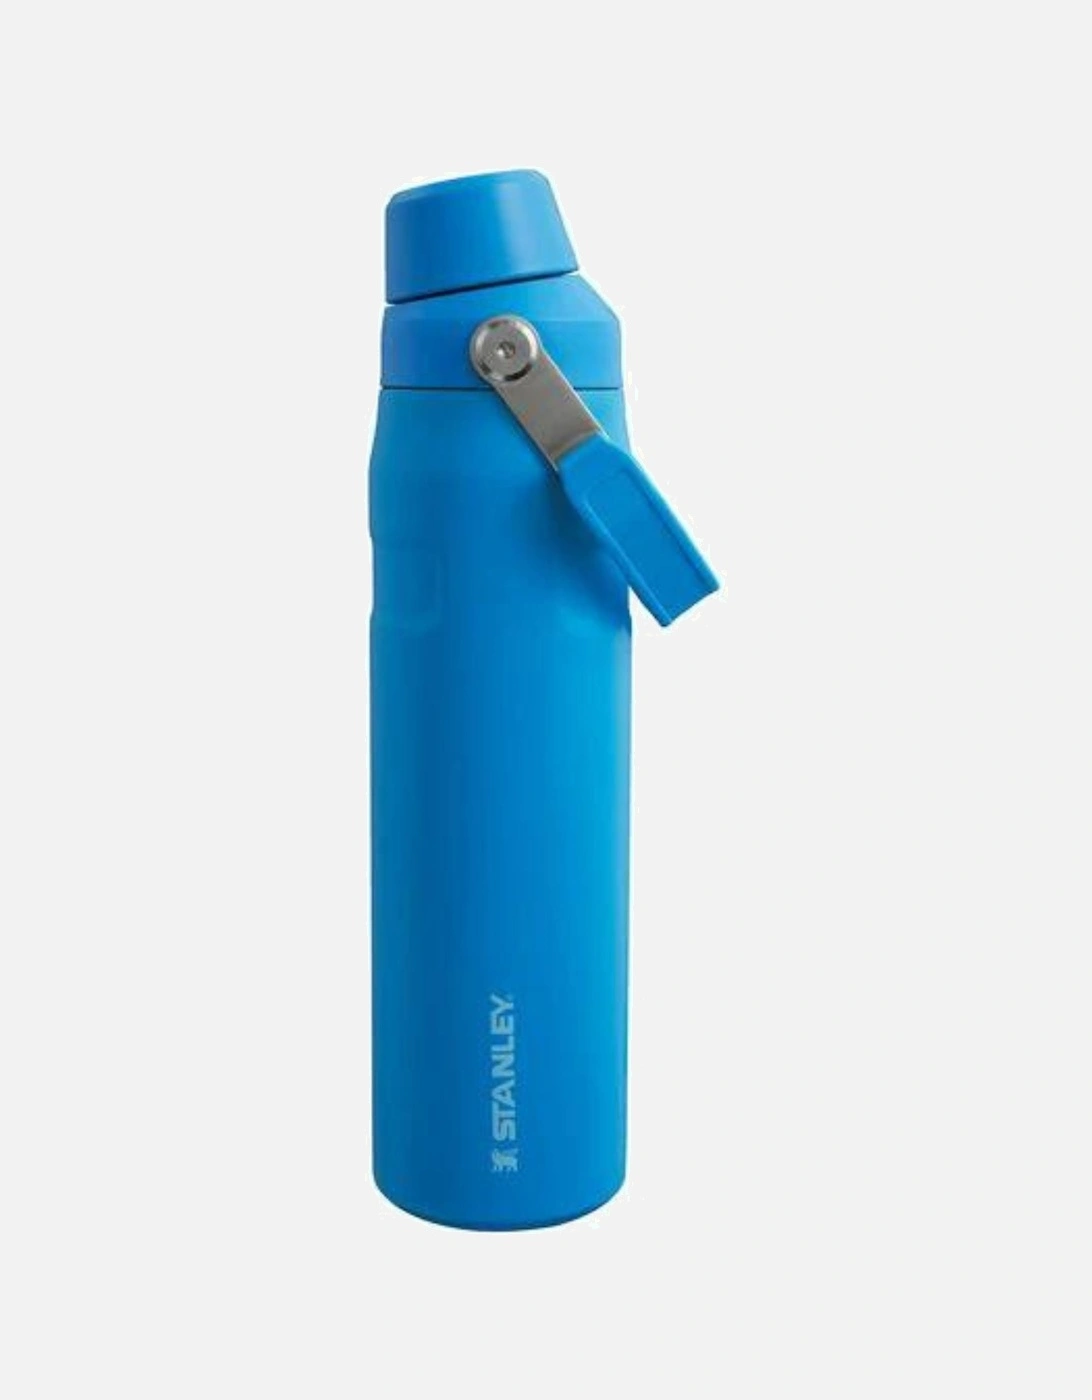 The IceFlow Fast Flow 0.6L Carry Handle Water Bottle